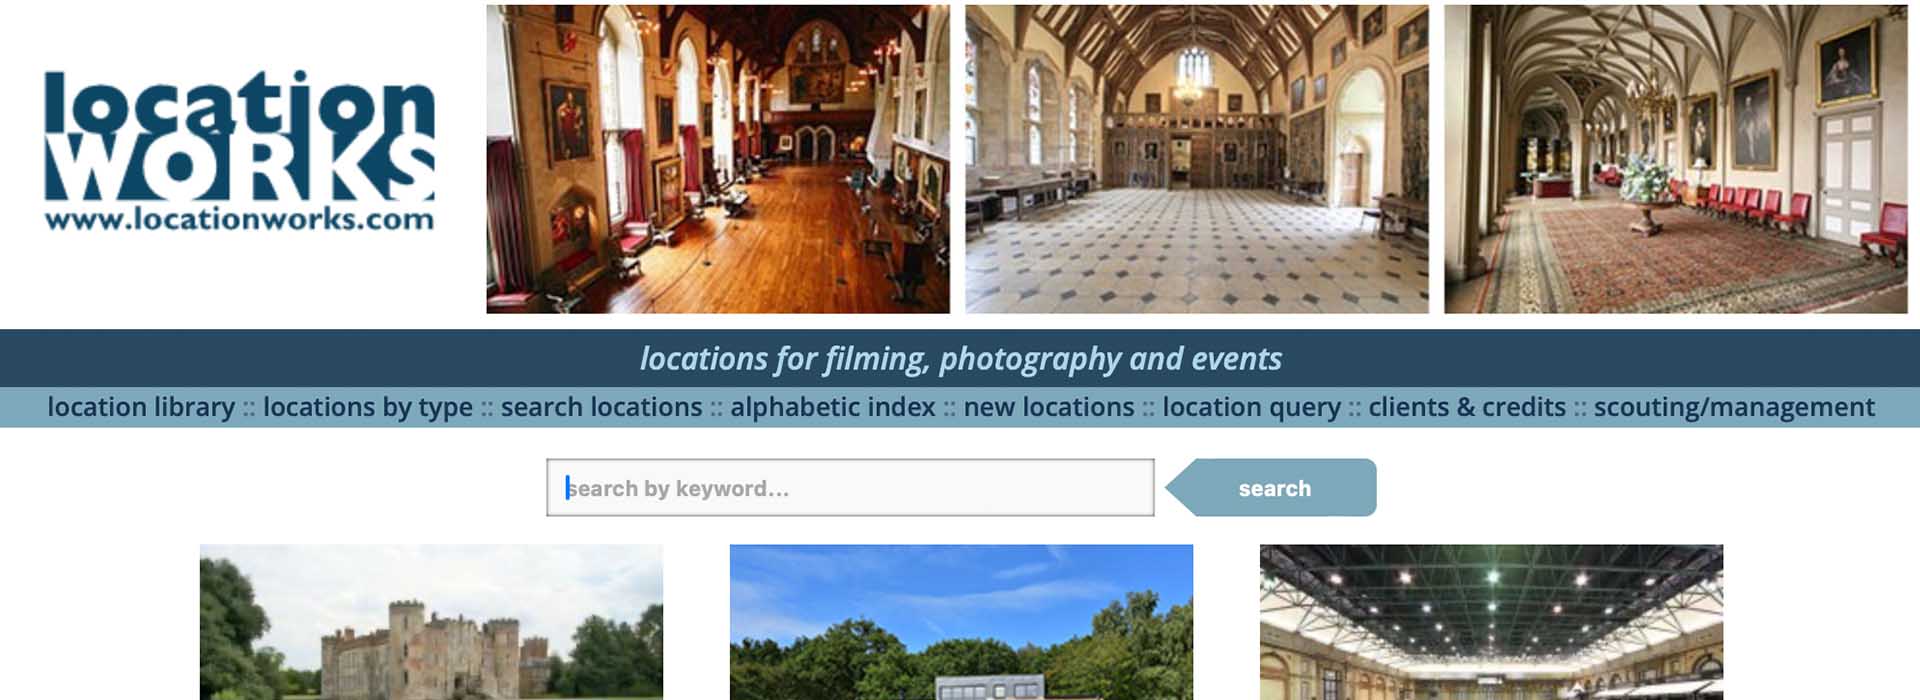 Location Works - a location agency in London